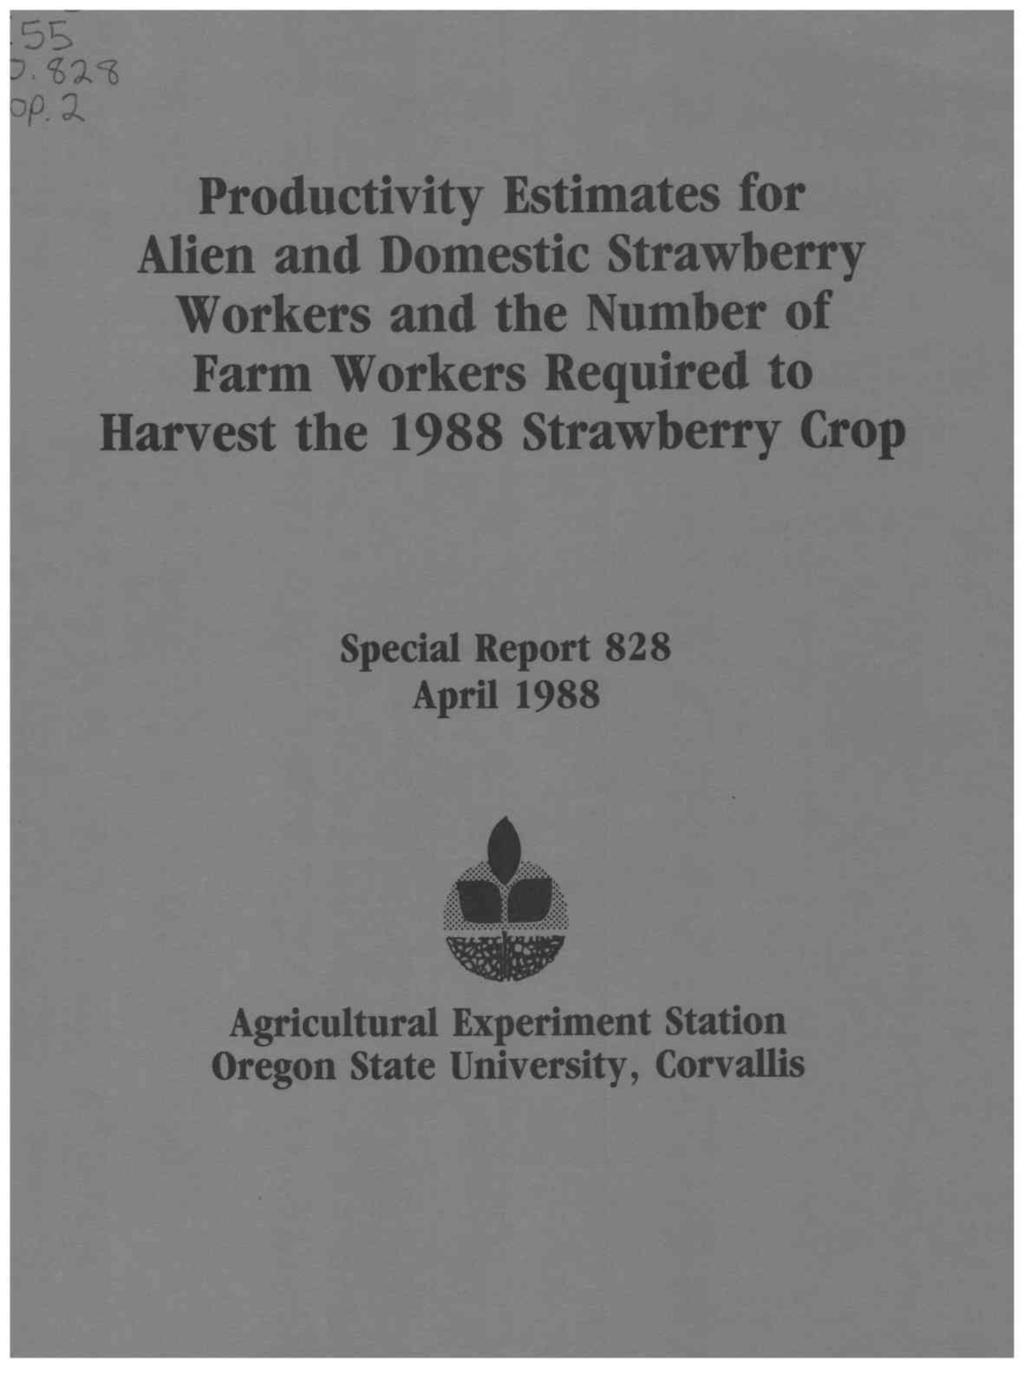 oductivity Estimates for Alien and Domestic Strawberry Workers and the Number of Farm Workers Required to Harvest the